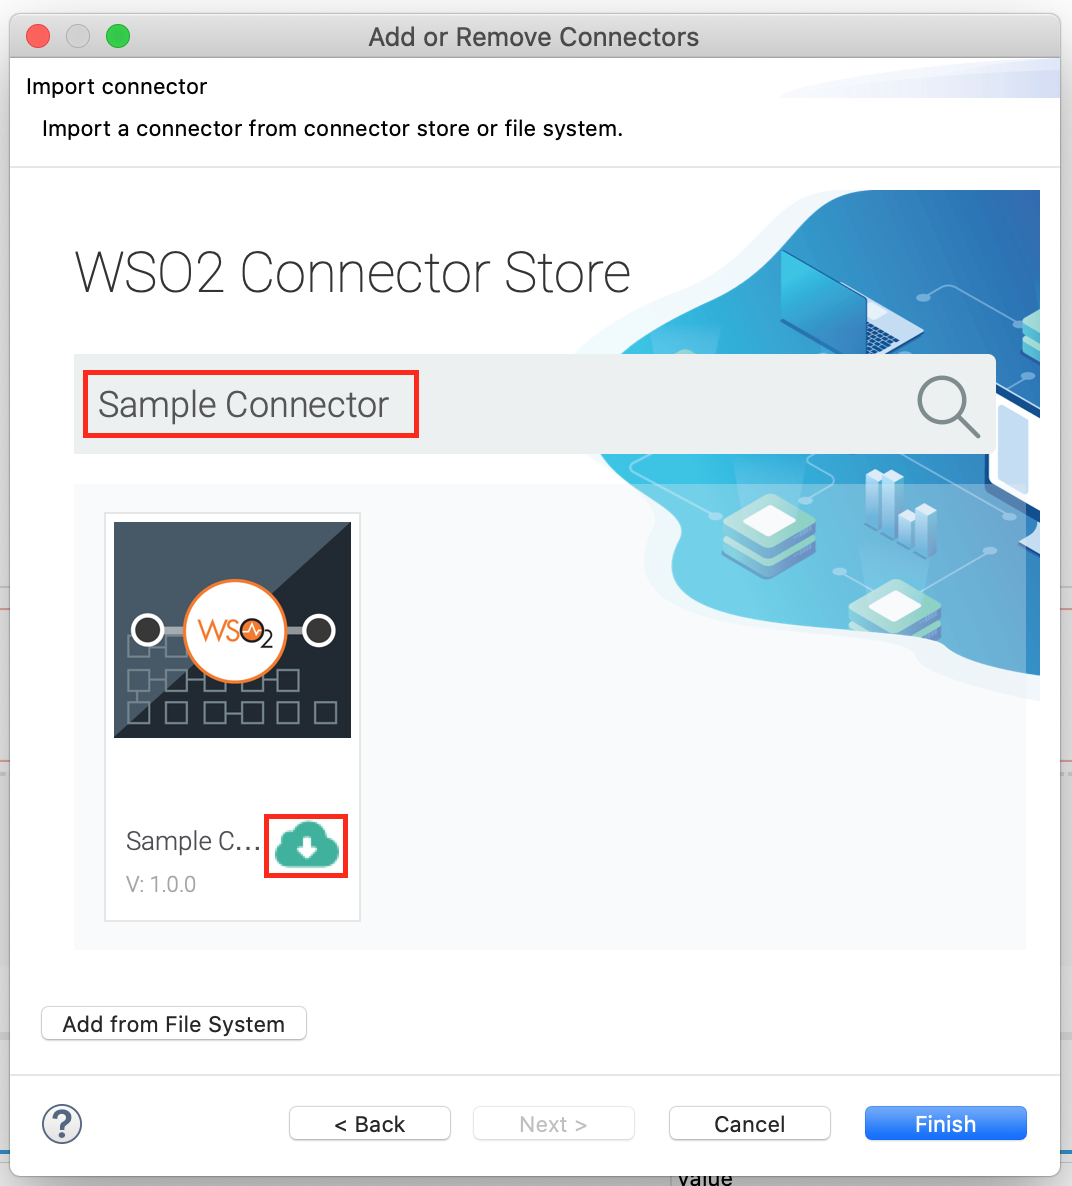 Search Connector in the Connector Store